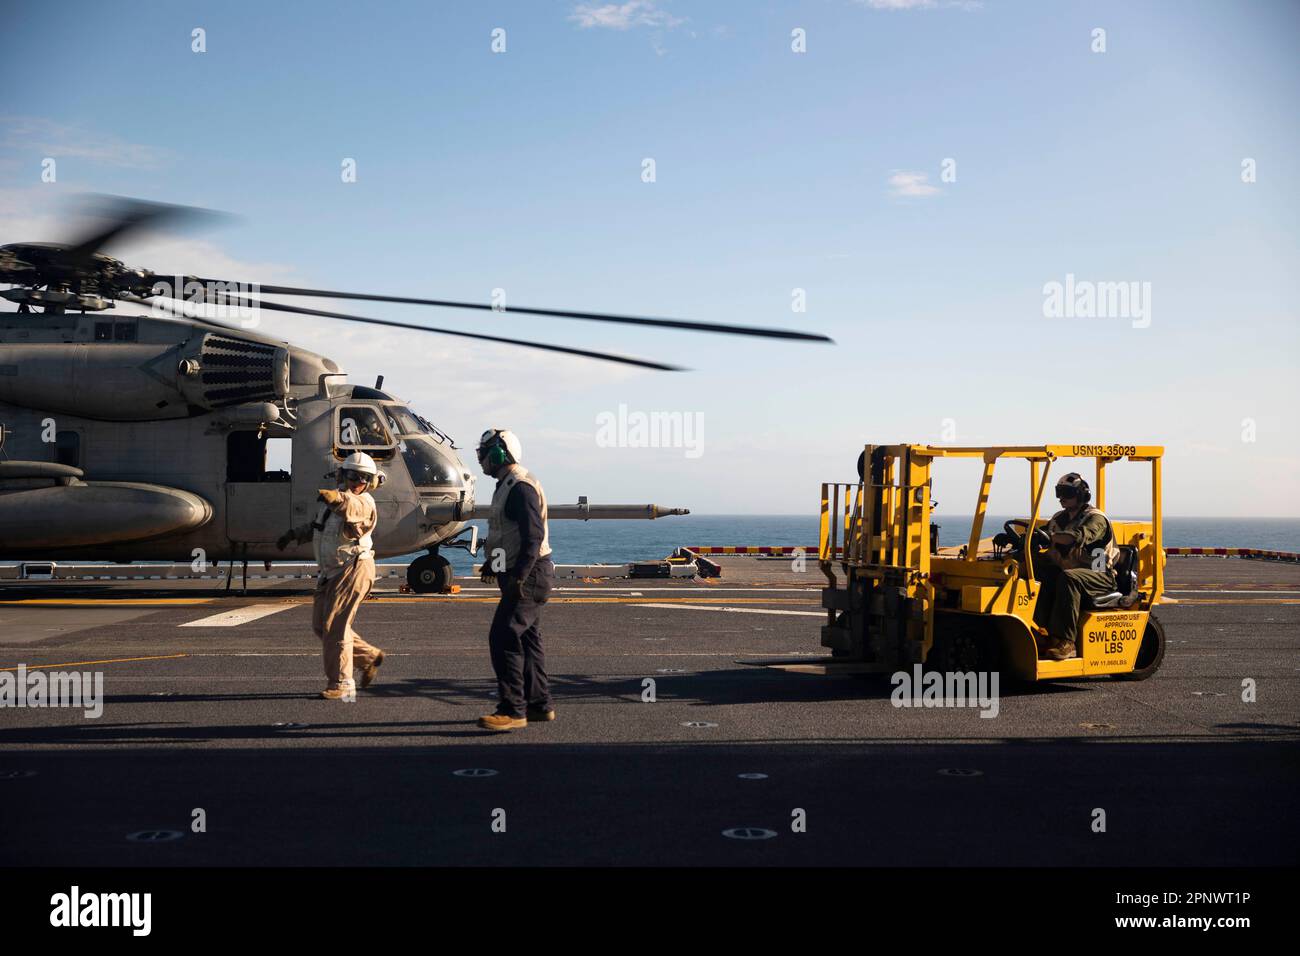 230414-N-HA192-1220 ATLANTIC OCEAN (April 14, 2023) Wasp-class amphibious assault ship USS Bataan (LHD 5) Combat Cargo Marines retrieve cargo from a CH-53E Super Stallion, assigned to Marine Medium Tilt Rotor Squadron (VMM) 162 (reinforced), April 14, 2023. Bataan is the flagship for Commander, Amphibious Squadron EIGHT (PHIBRON 8) and is currently underway for the Bataan Amphibious Ready Group and 26th Marine Expeditionary Unit exercise (ARGMEUEX). The exercise enhances joint integration, lethality and collective capabilities of the Navy-Marine Corps team through joint planning and execution Stock Photo